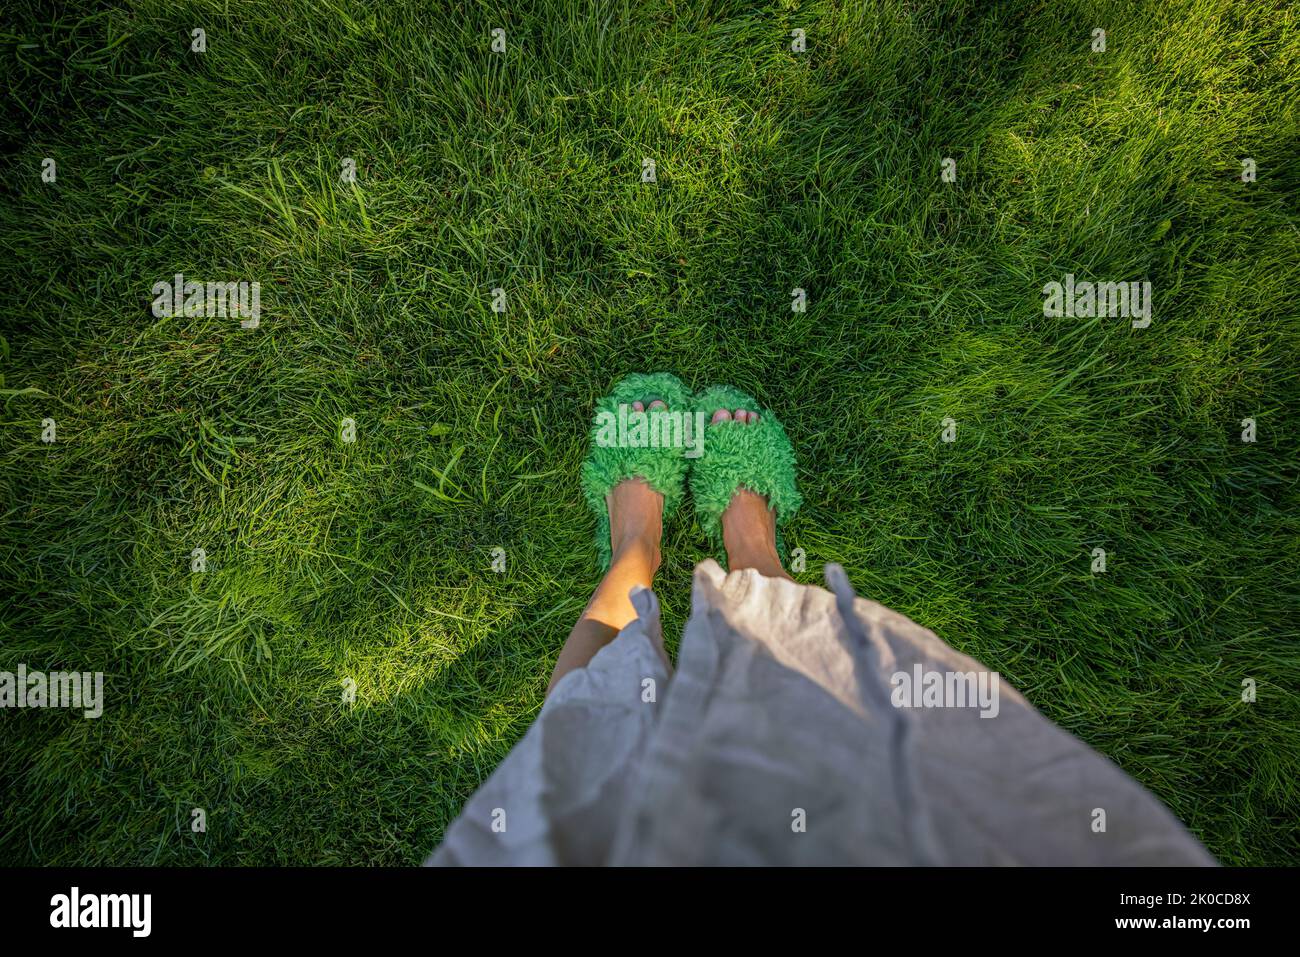 Woman in fluffy slippers on green grass, view from above Stock Photo